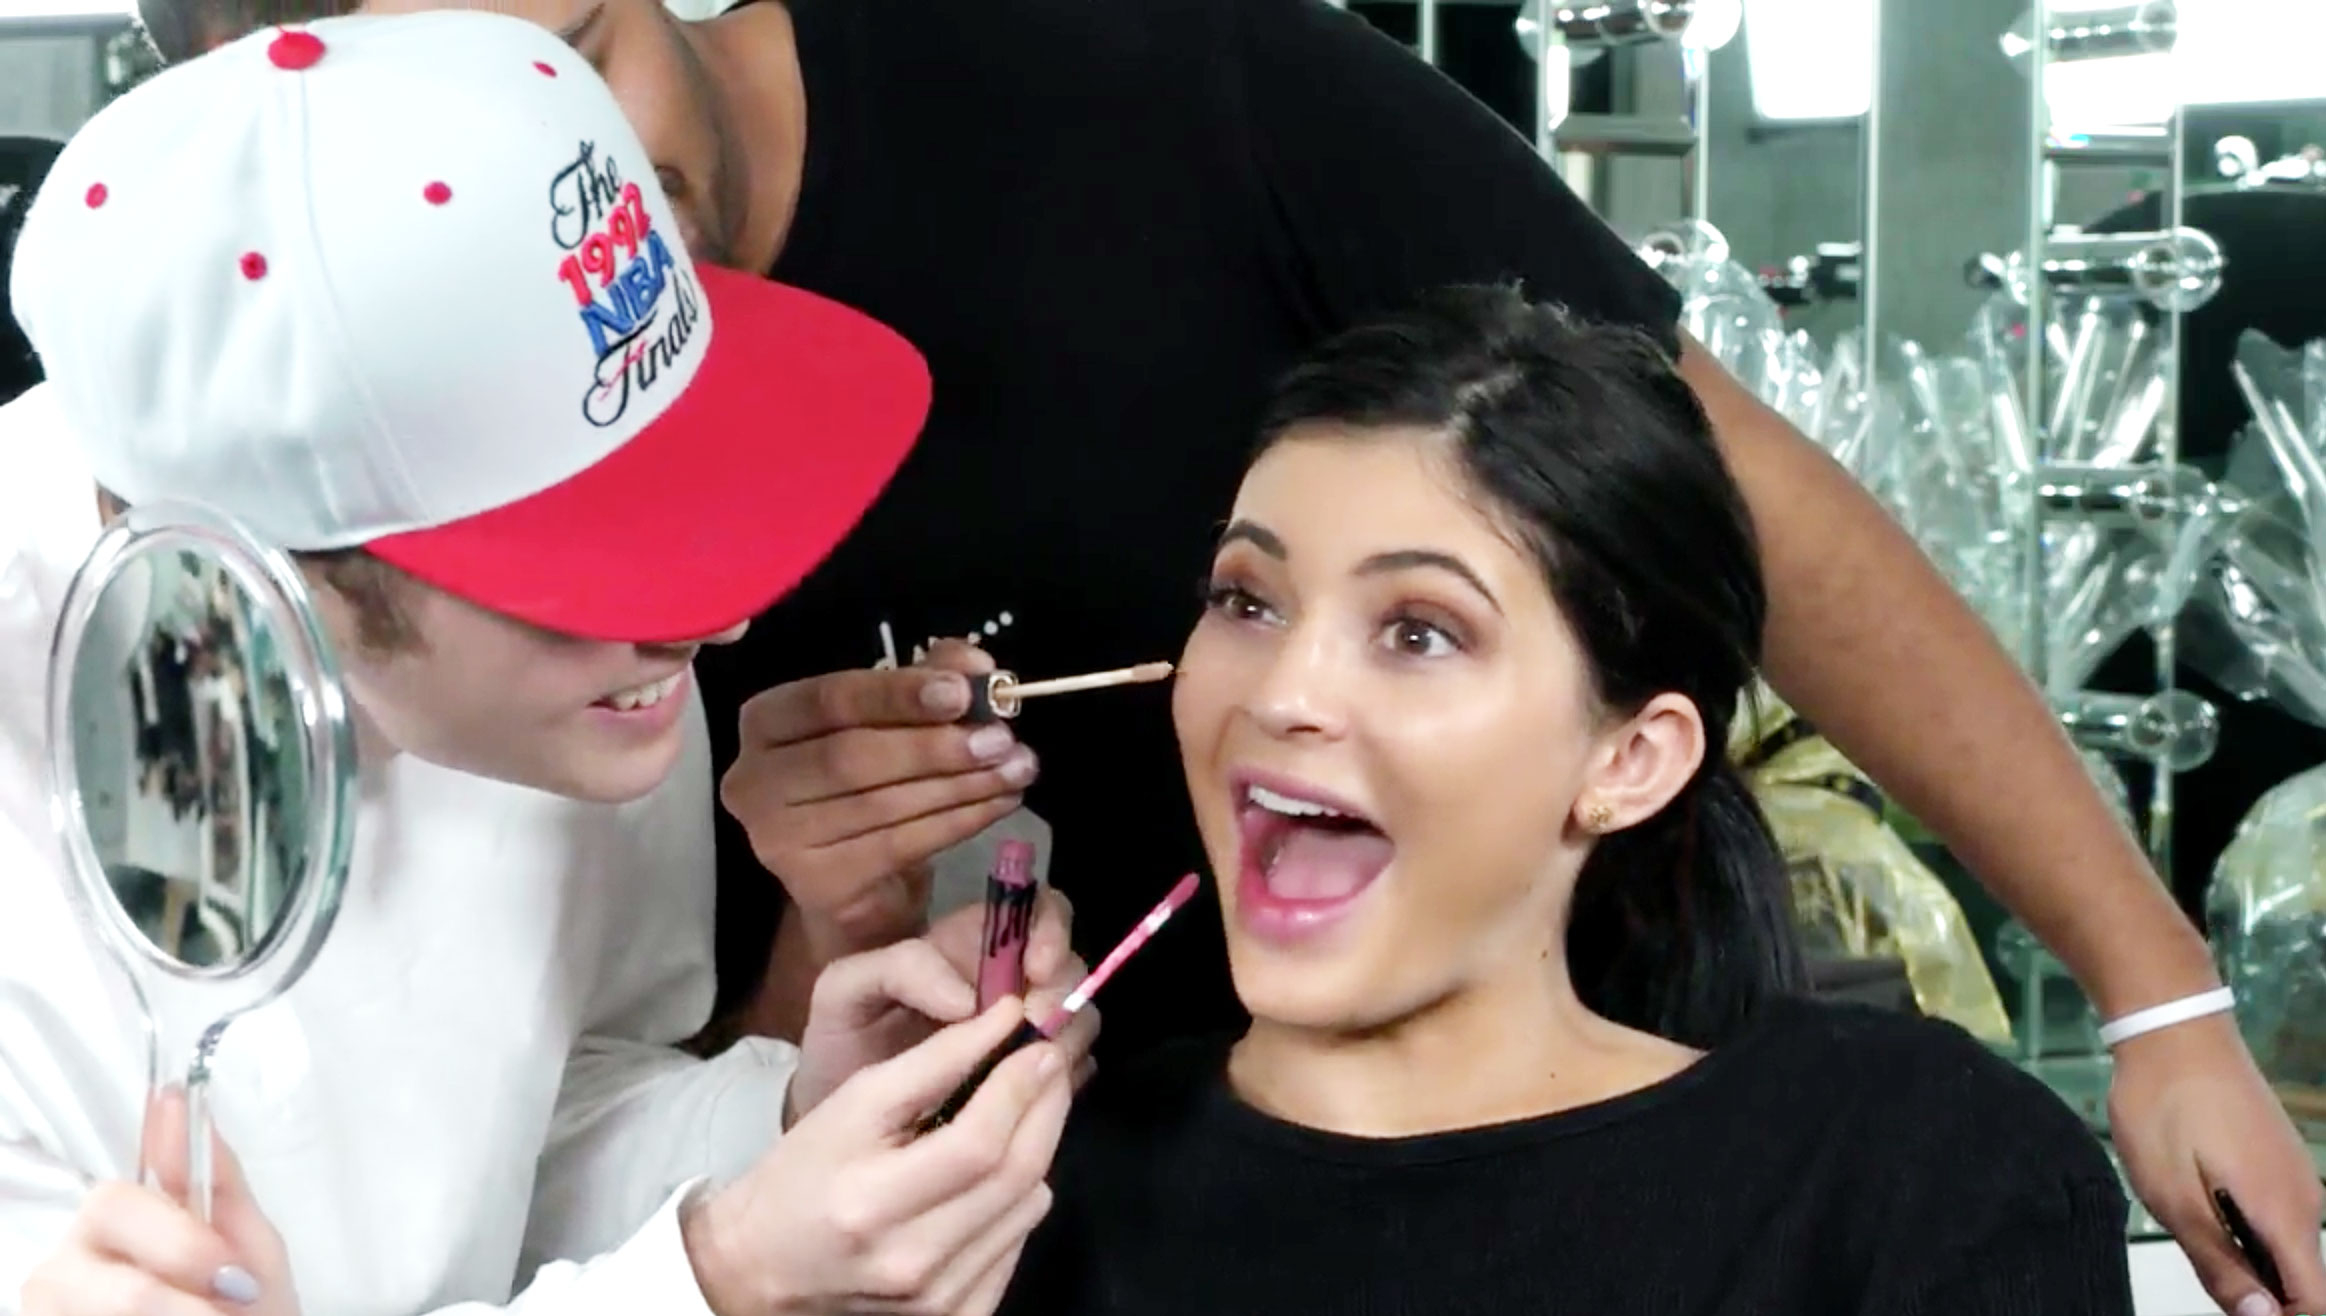 Kylie Jenner Let Some Guys With No Experience Do Her Makeup